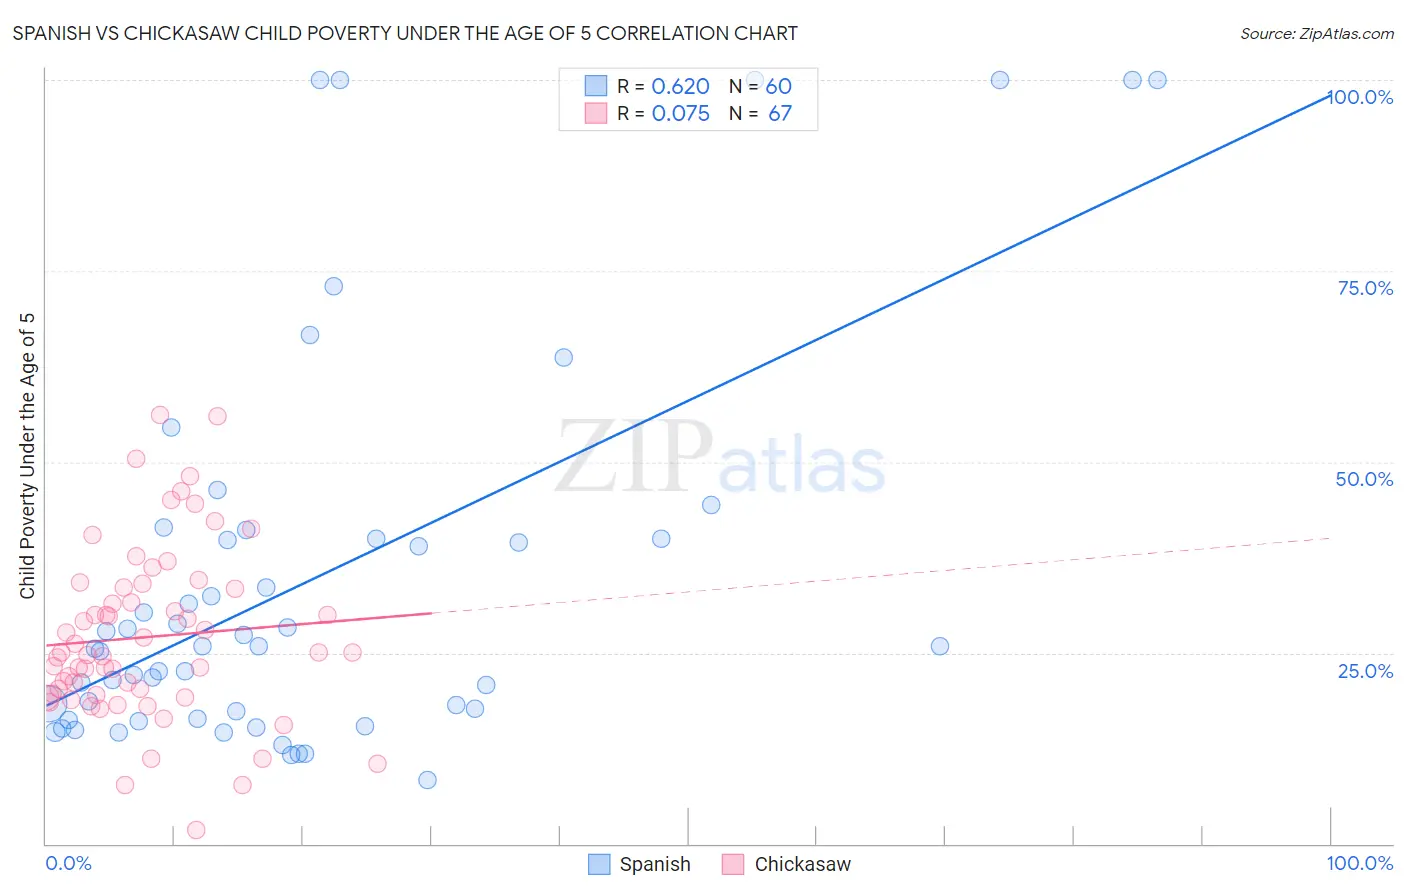 Spanish vs Chickasaw Child Poverty Under the Age of 5